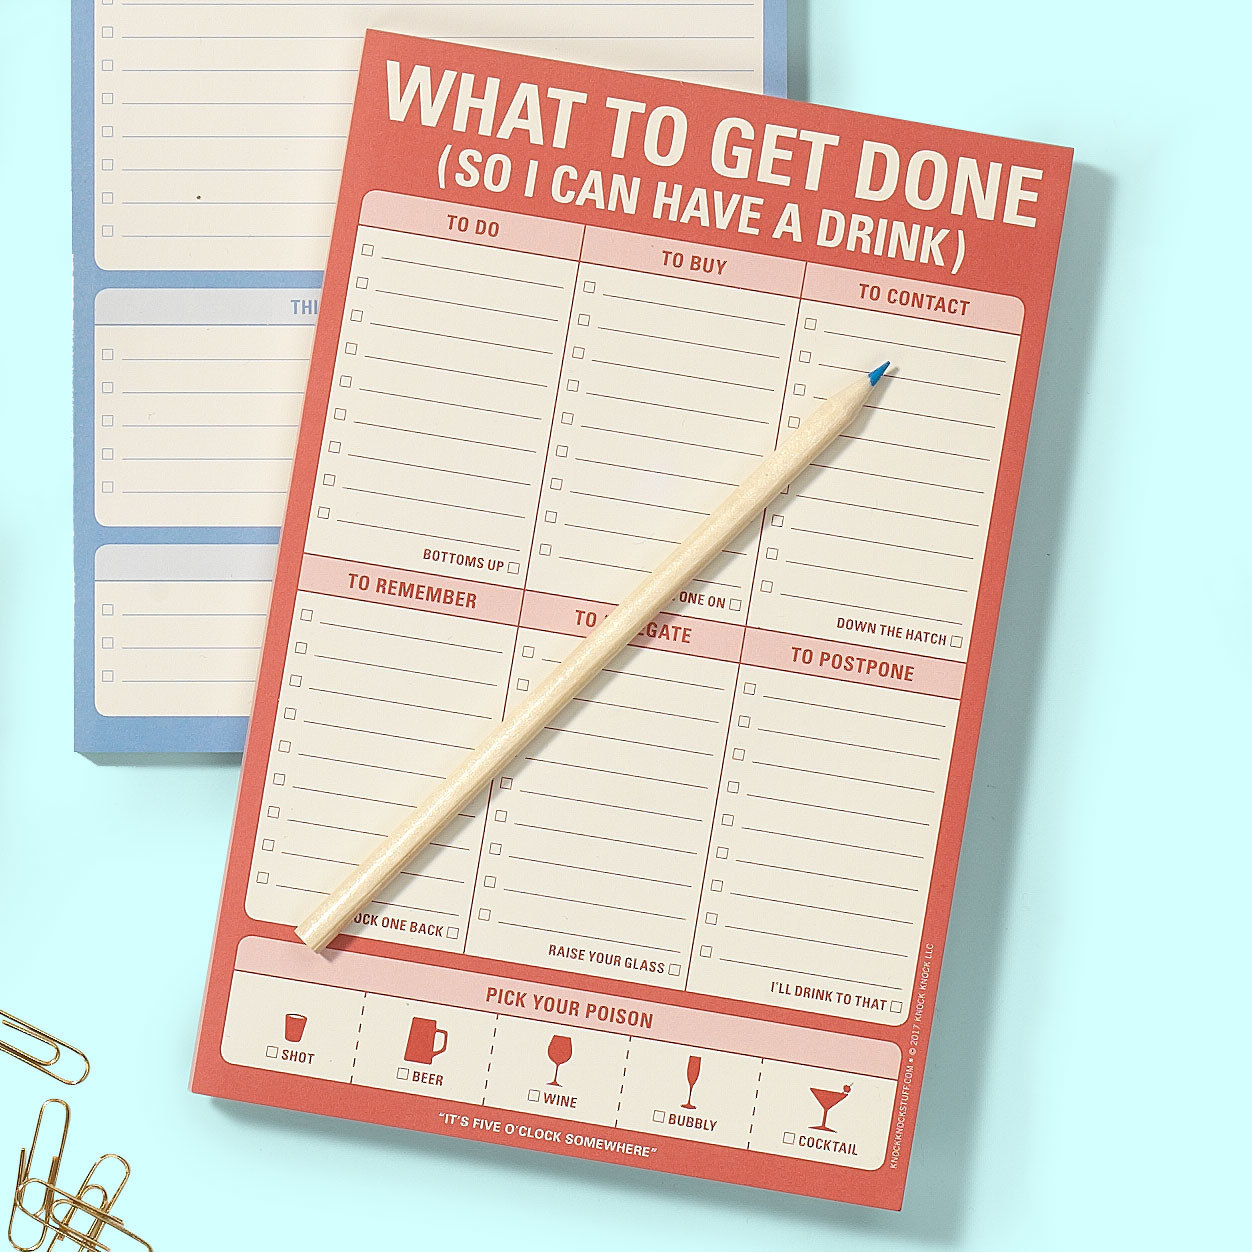 A pad that says &quot;What to get done so I can have a drink&quot; with six main sections with room for lists under each, then one section at the bottom with several drink options